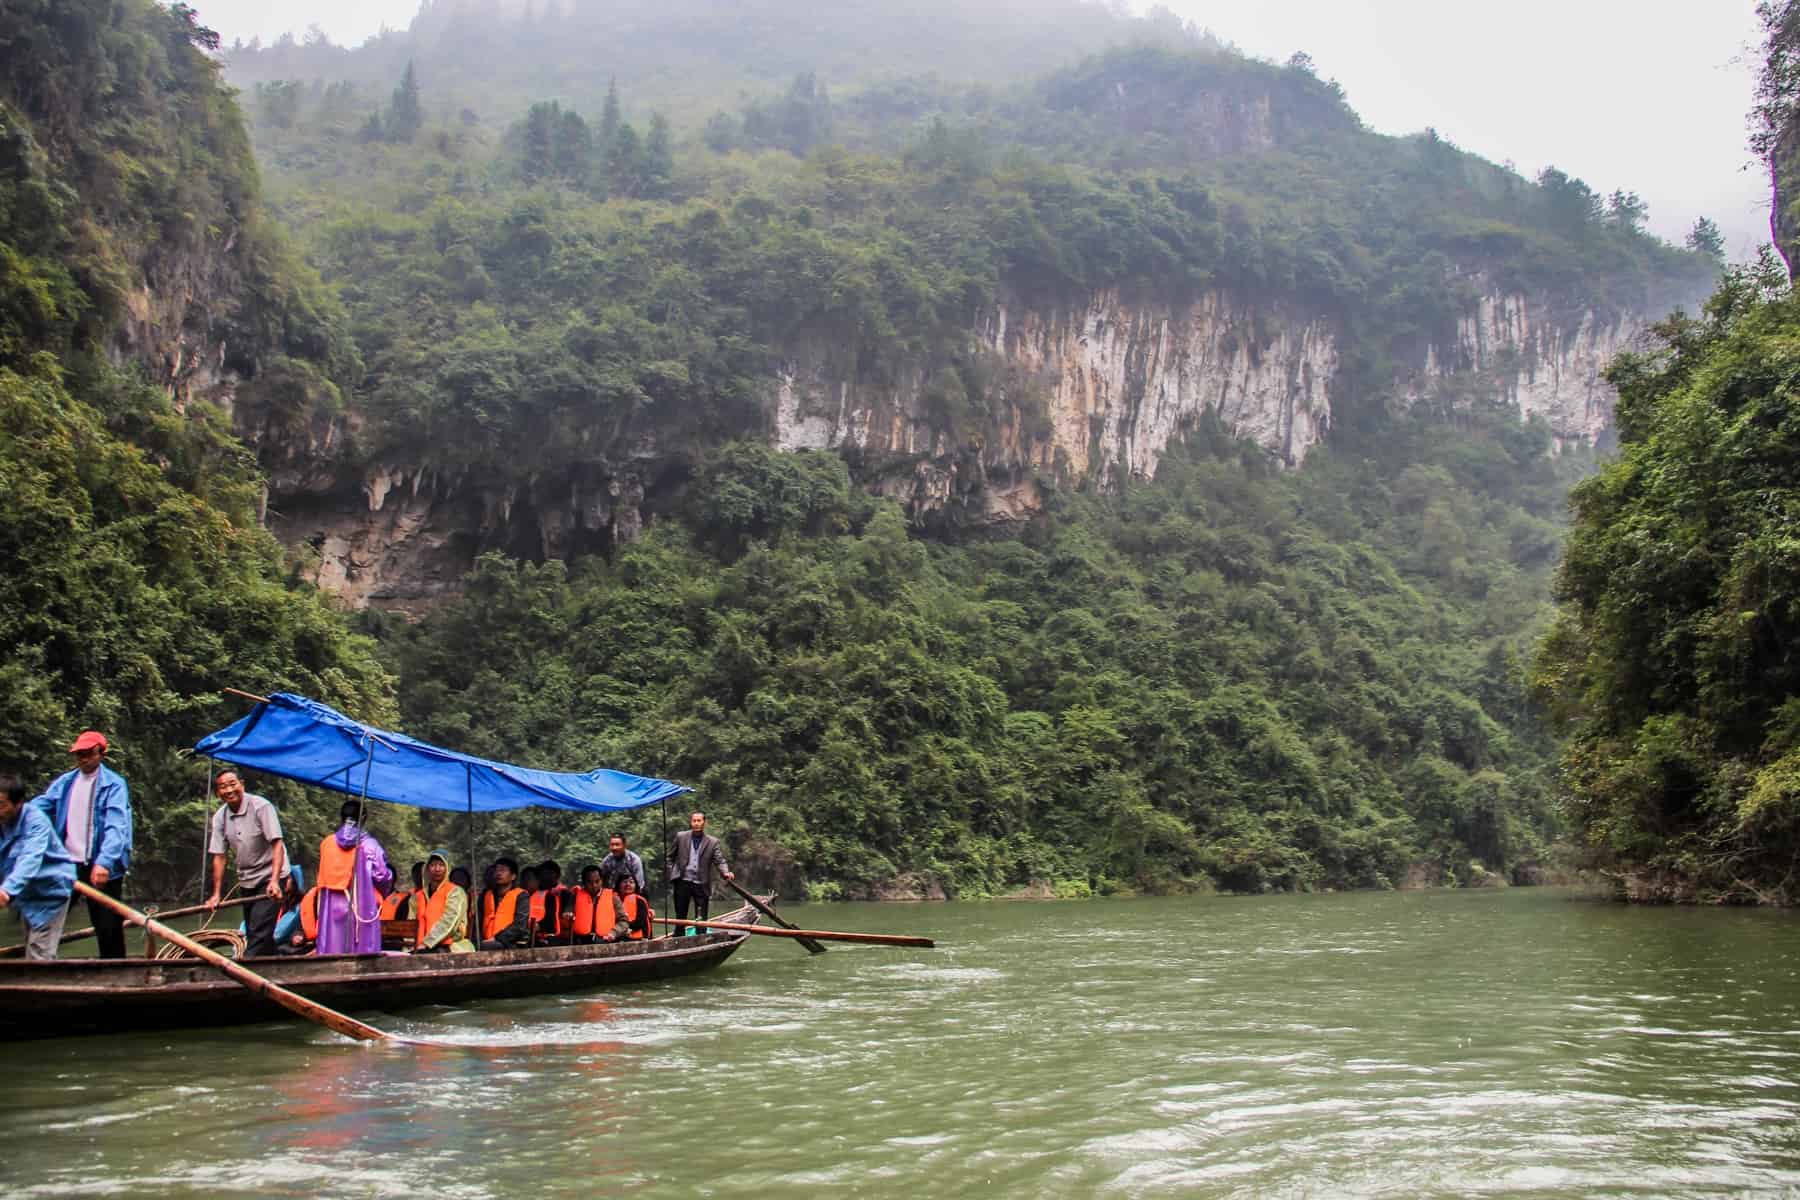 A small group of travellers in a paddle boat with a blue roof, admiring the view of the Three Gorges area on the green Yangtze River